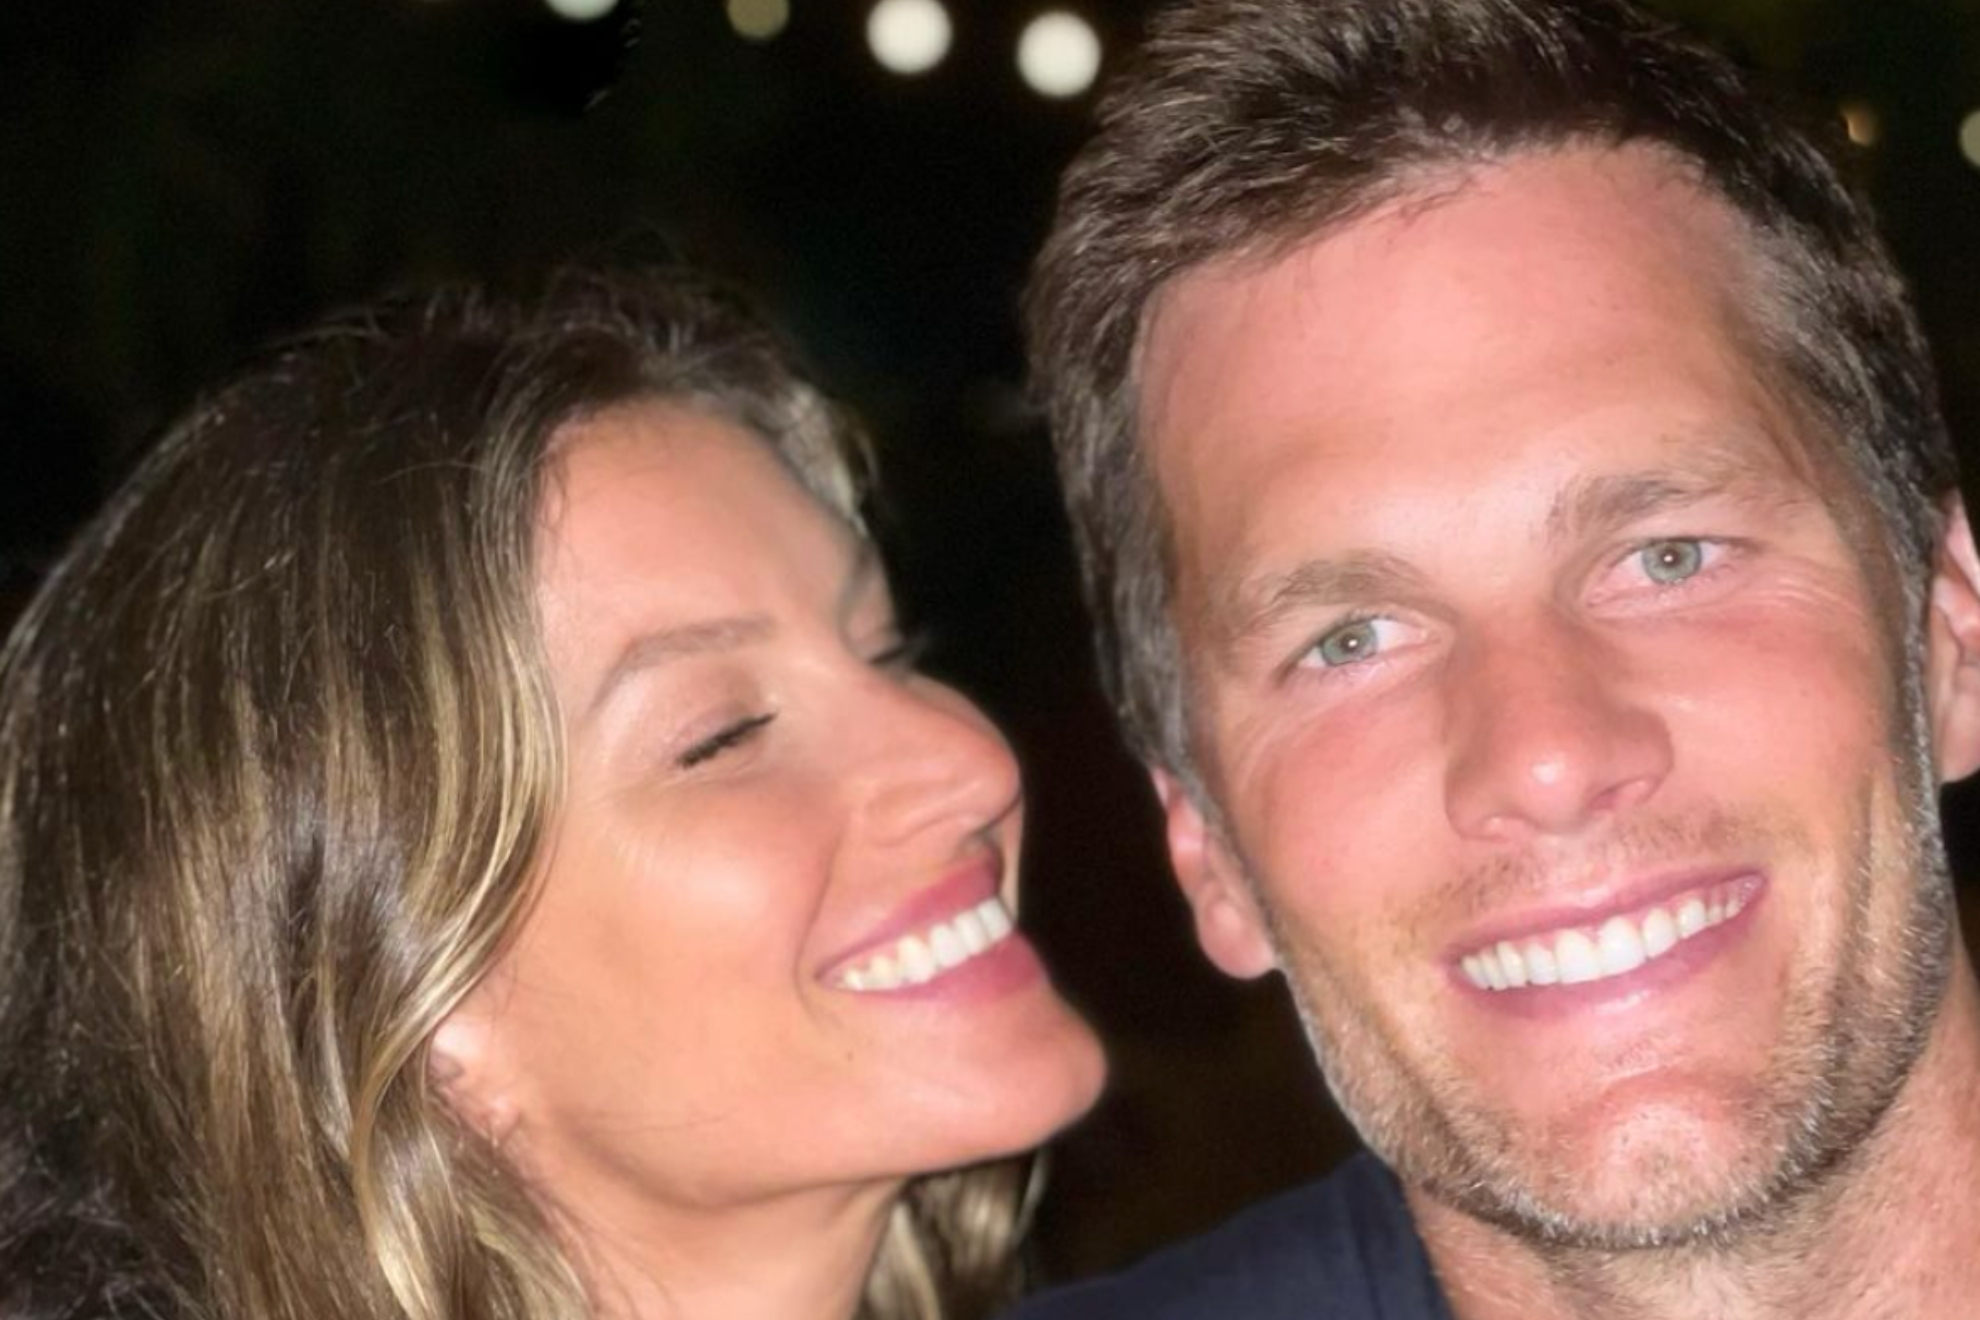 Instagram picture of Gisele Bündchen and Tom Brady when they were still married.